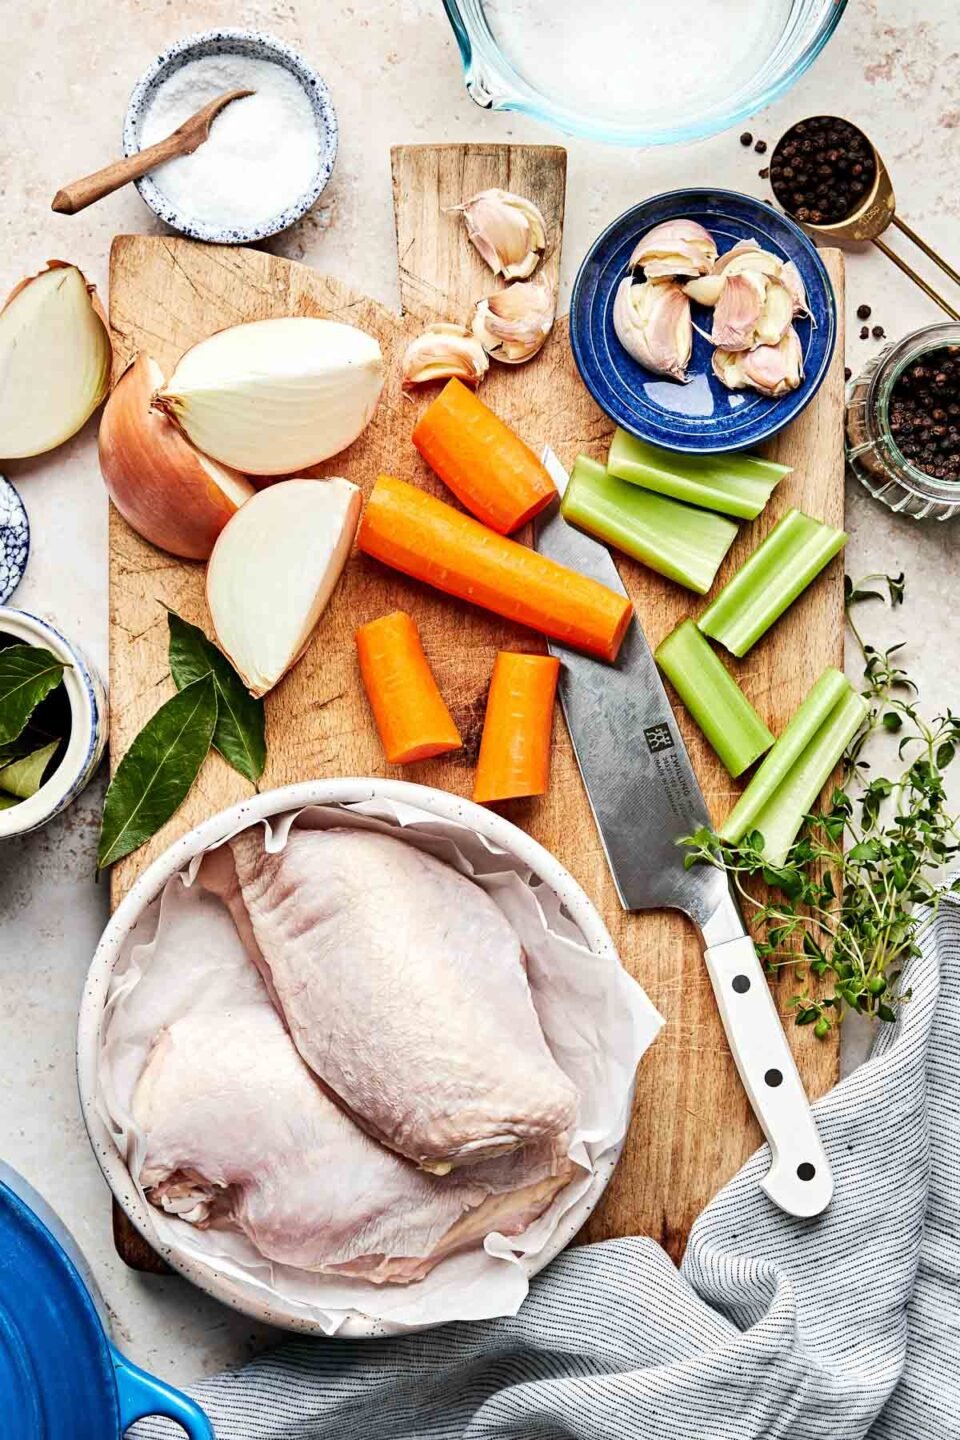 Ingredients are displayed on a wooden board and a textured off-white surface: raw chicken, large pieces of onions, carrots, and celery, garlic, fresh herbs, salt and pepper.